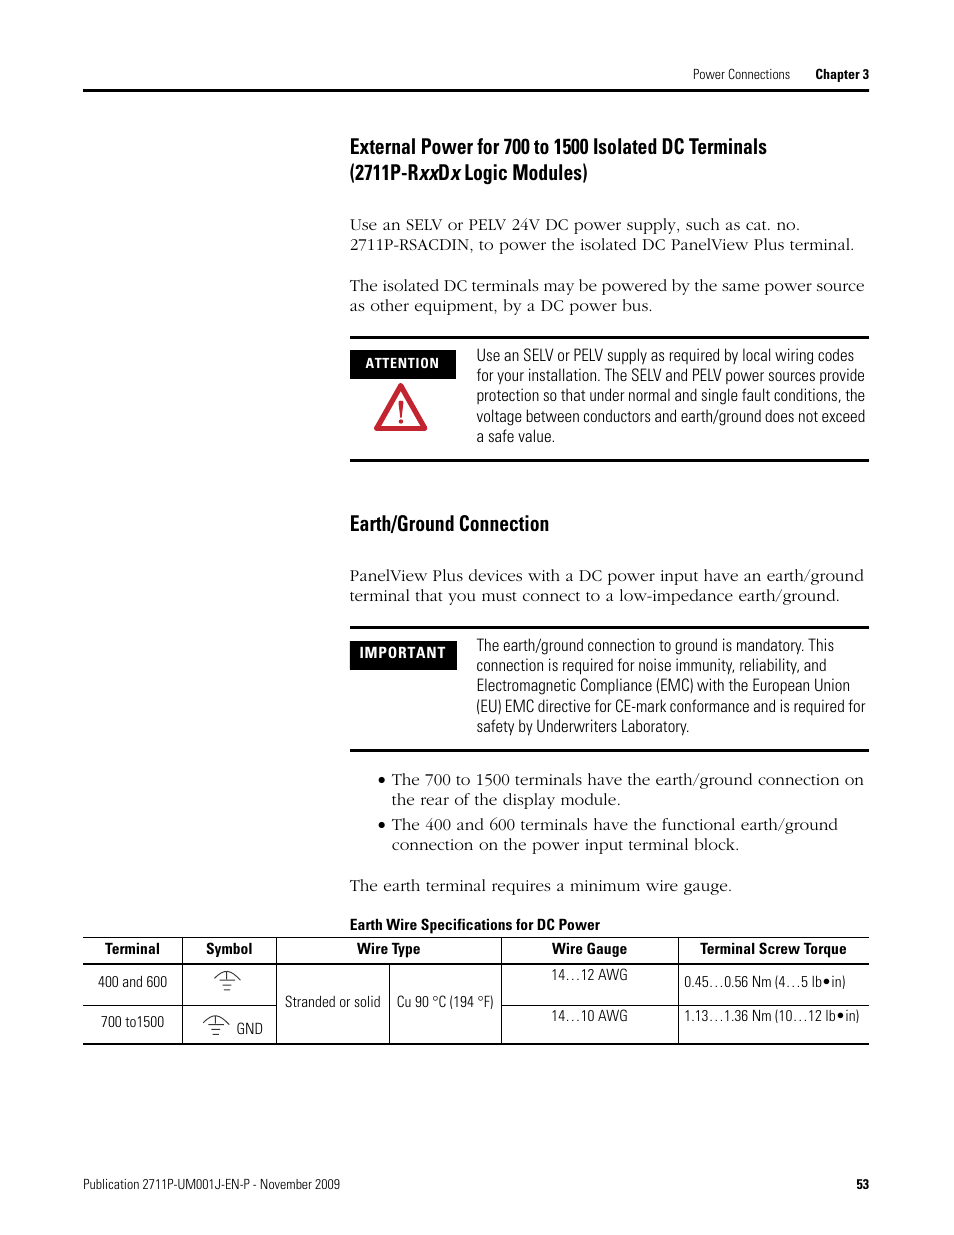 Earth/ground connection | Rockwell Automation 2711P PanelView Plus Terminal User Manual User Manual | Page 53 / 246